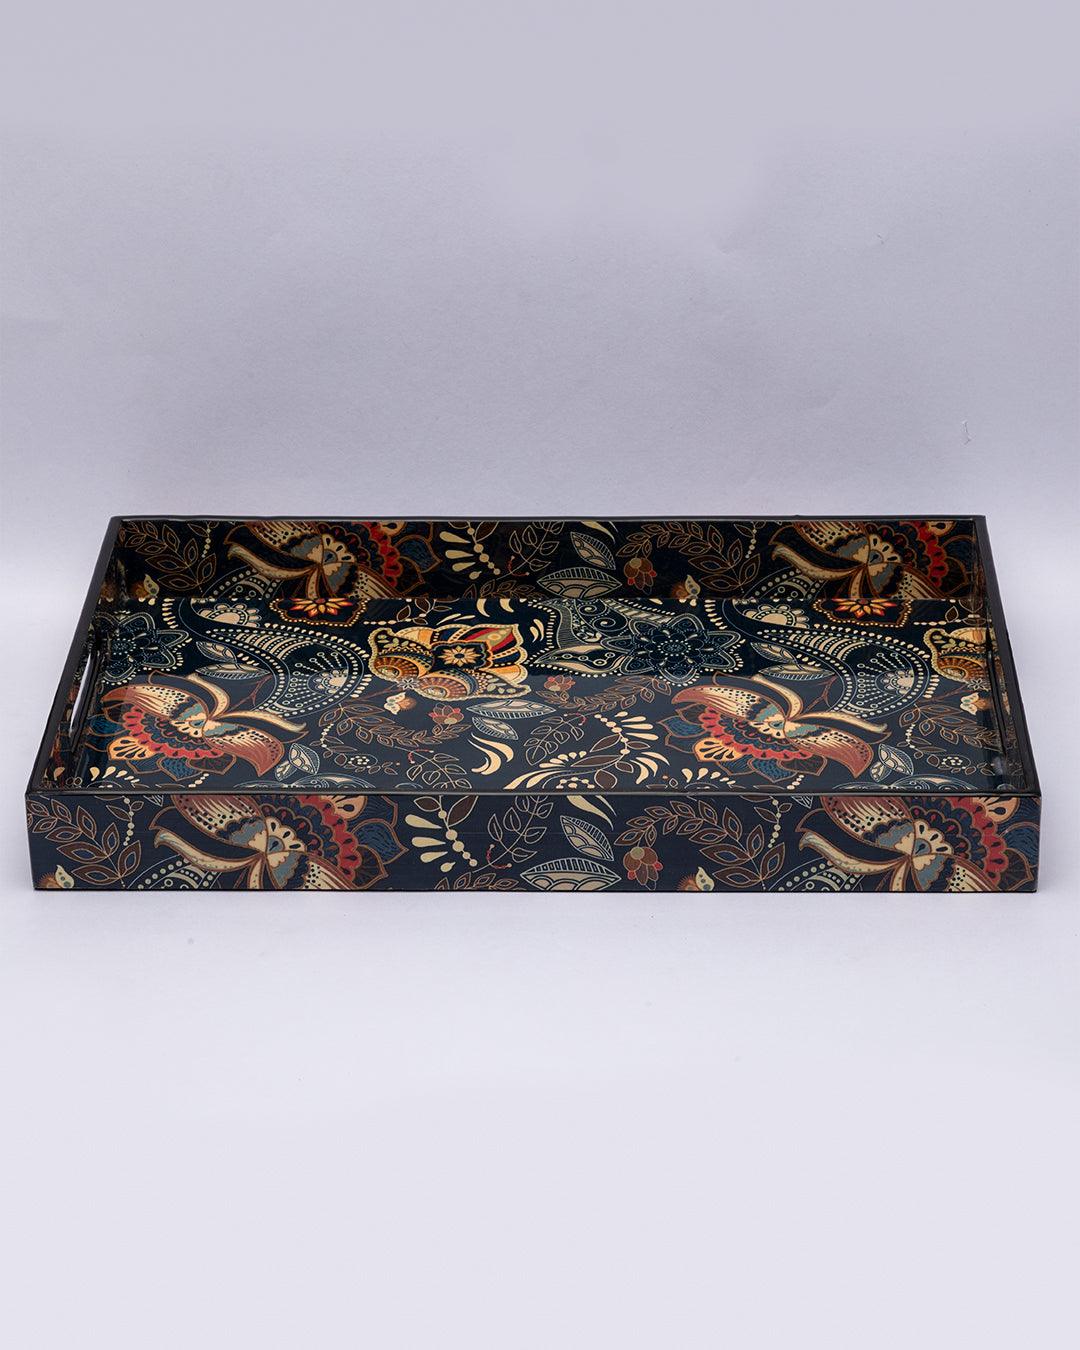 Market99 Decorative Serving Tray, Wooden Tray with Handles, Ethnic Design Tray, Home Décor, Standard, Rectangular, Multicolour, Colour, MDF - MARKET 99